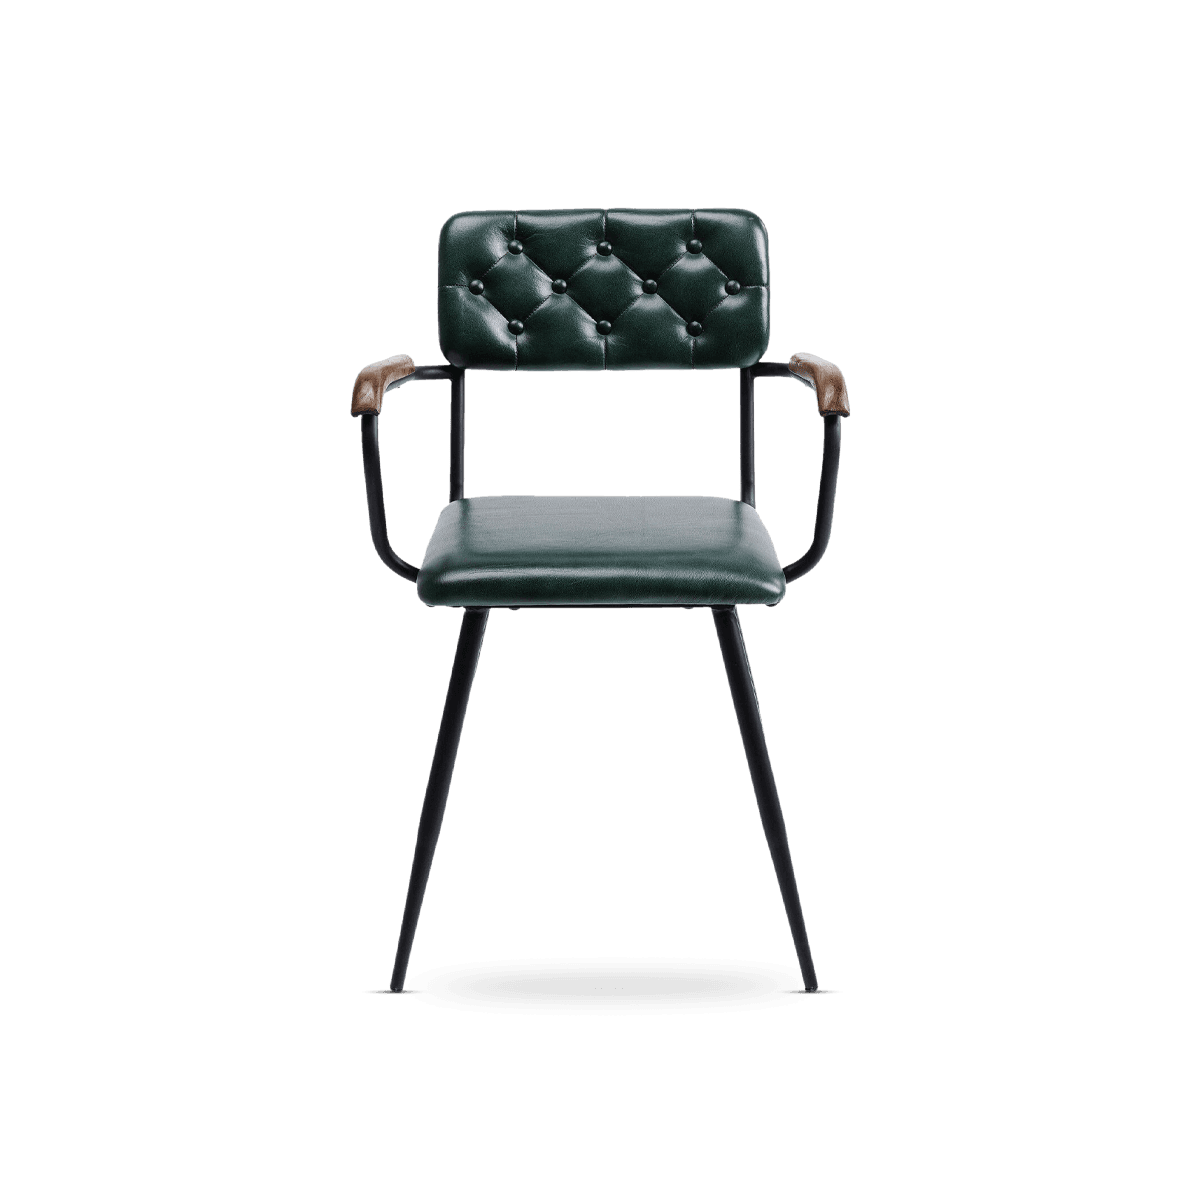 Dining Chair With Arm Rest Salsa  Leather Dark Green